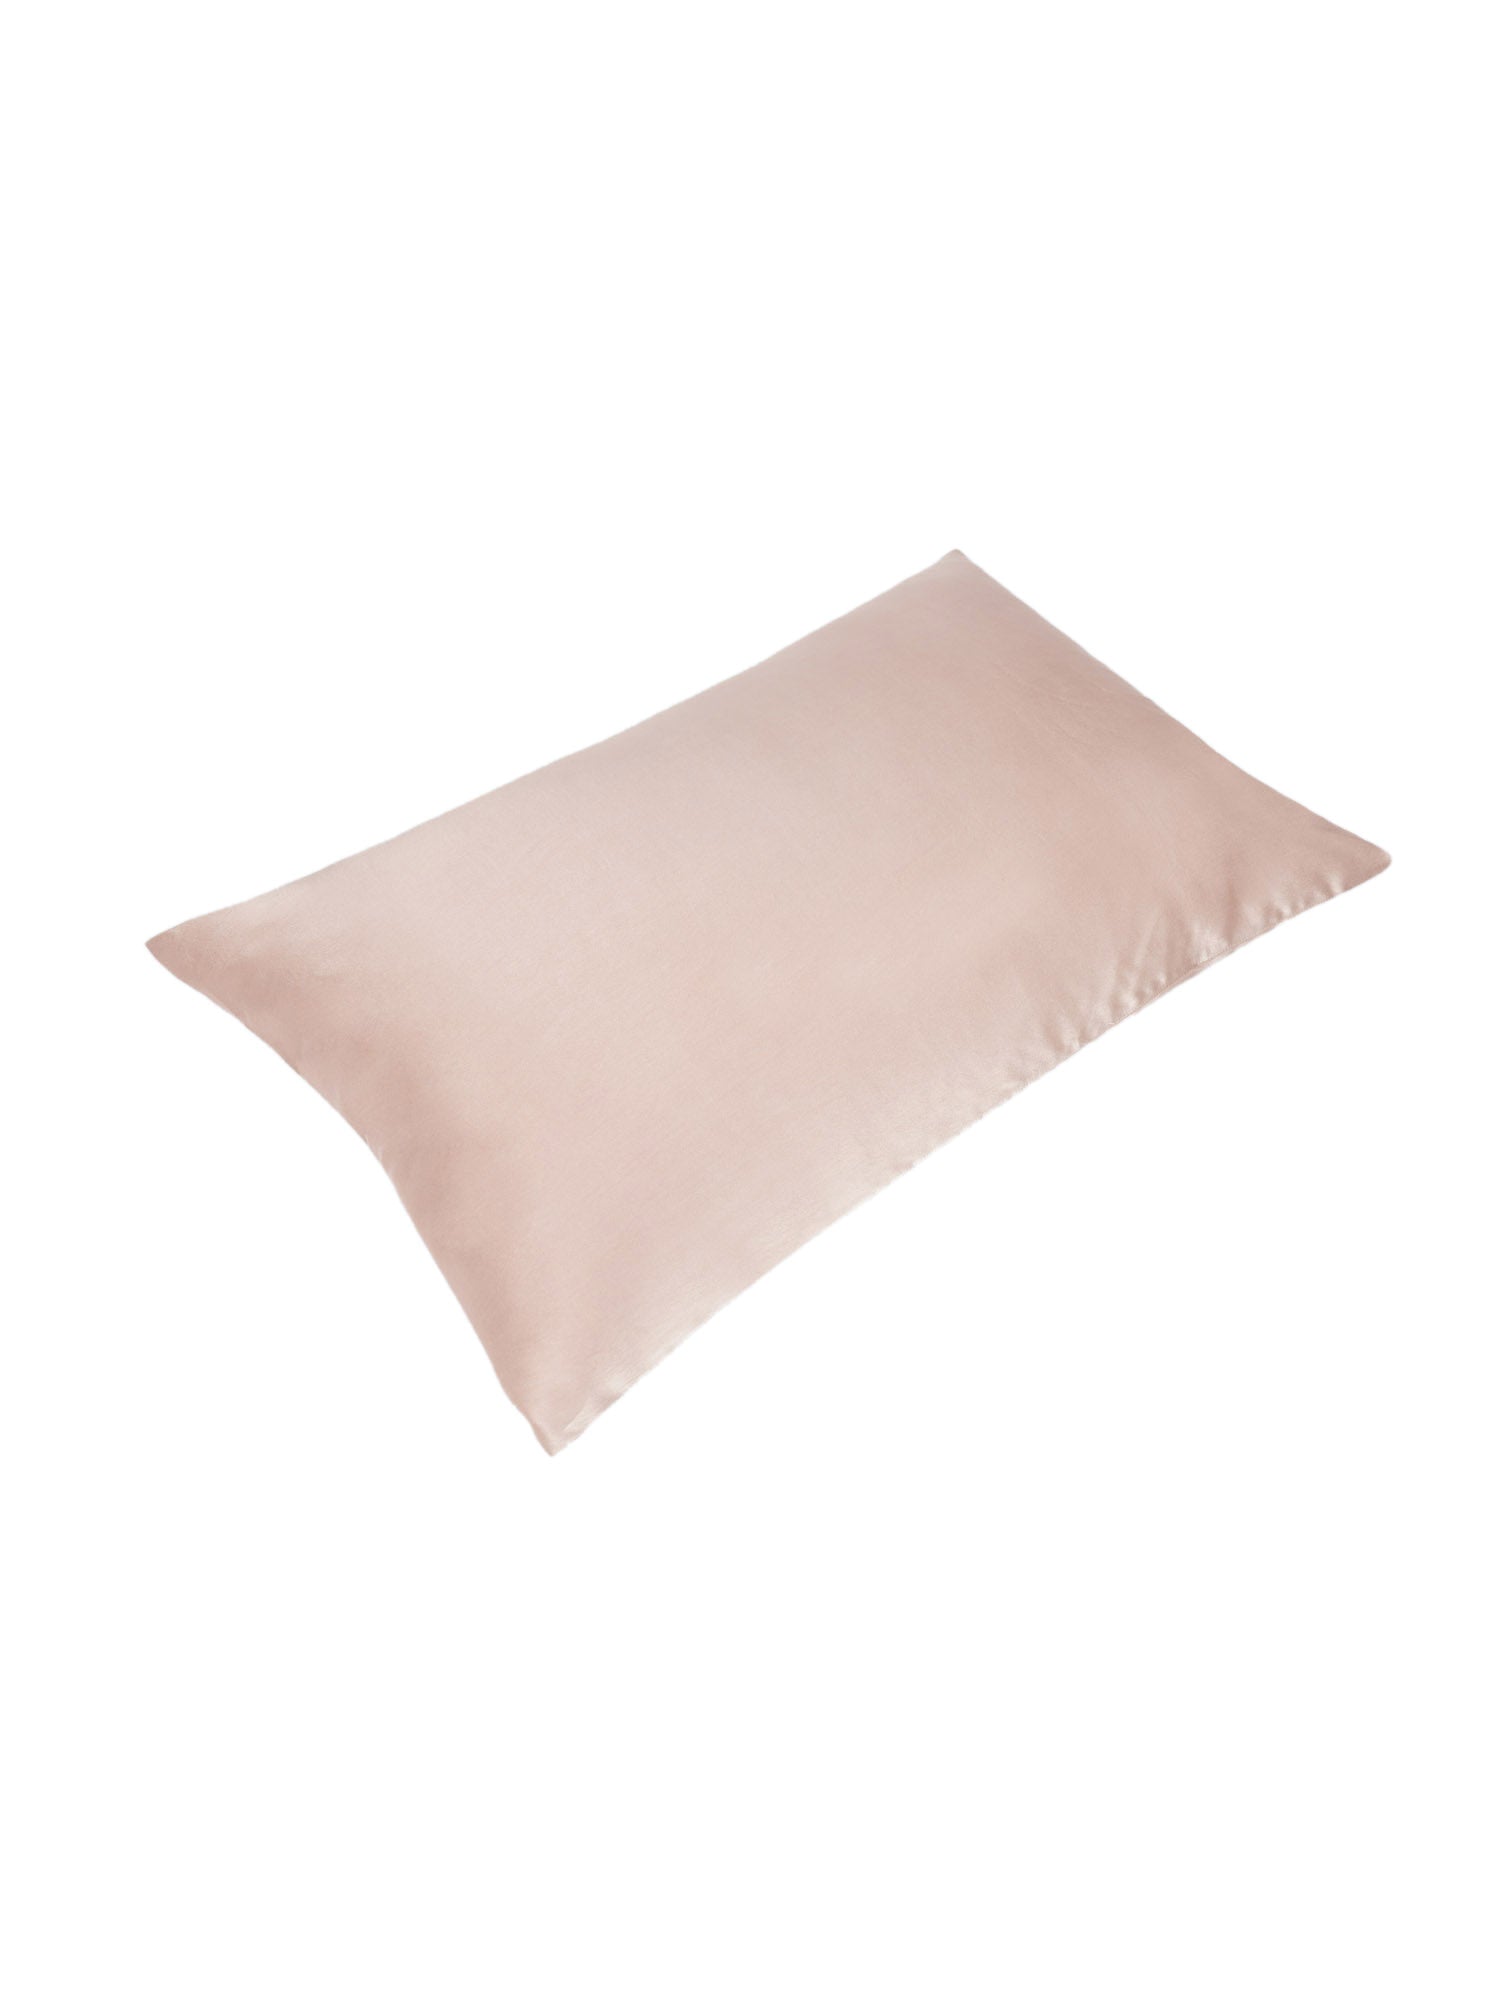 copy of olive green  00 pure mulberry silk pillow case